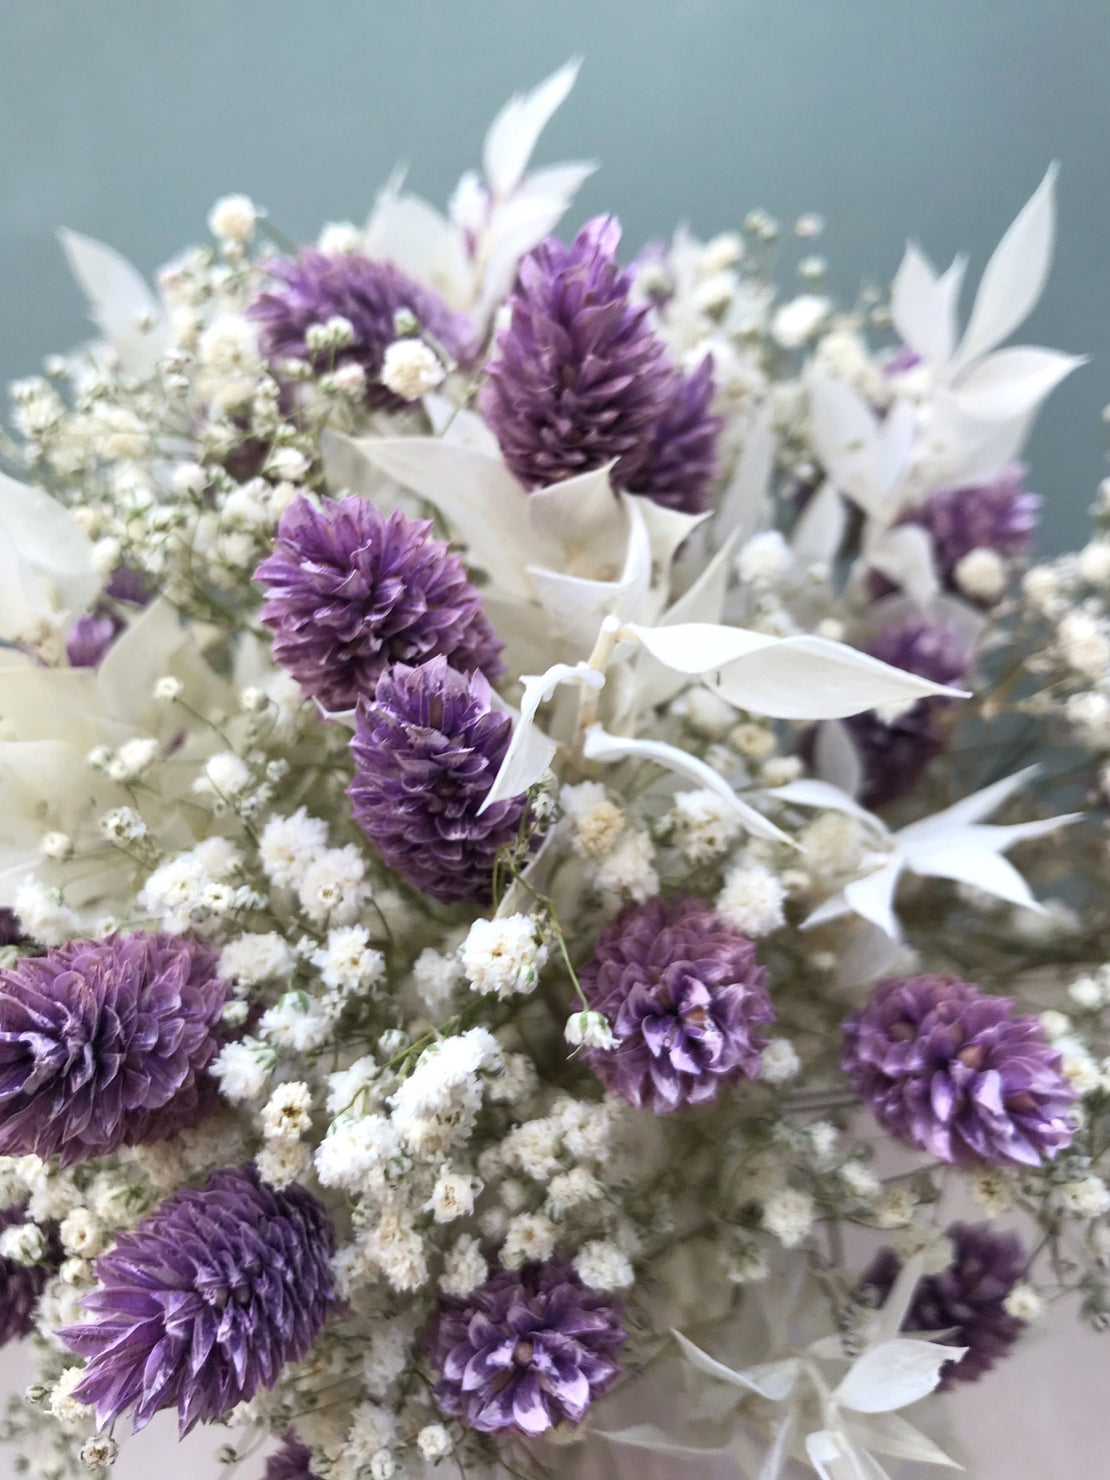 Bouquet of dried flowers with white gypsophila and purple canary grass - Bouquet “Mia”